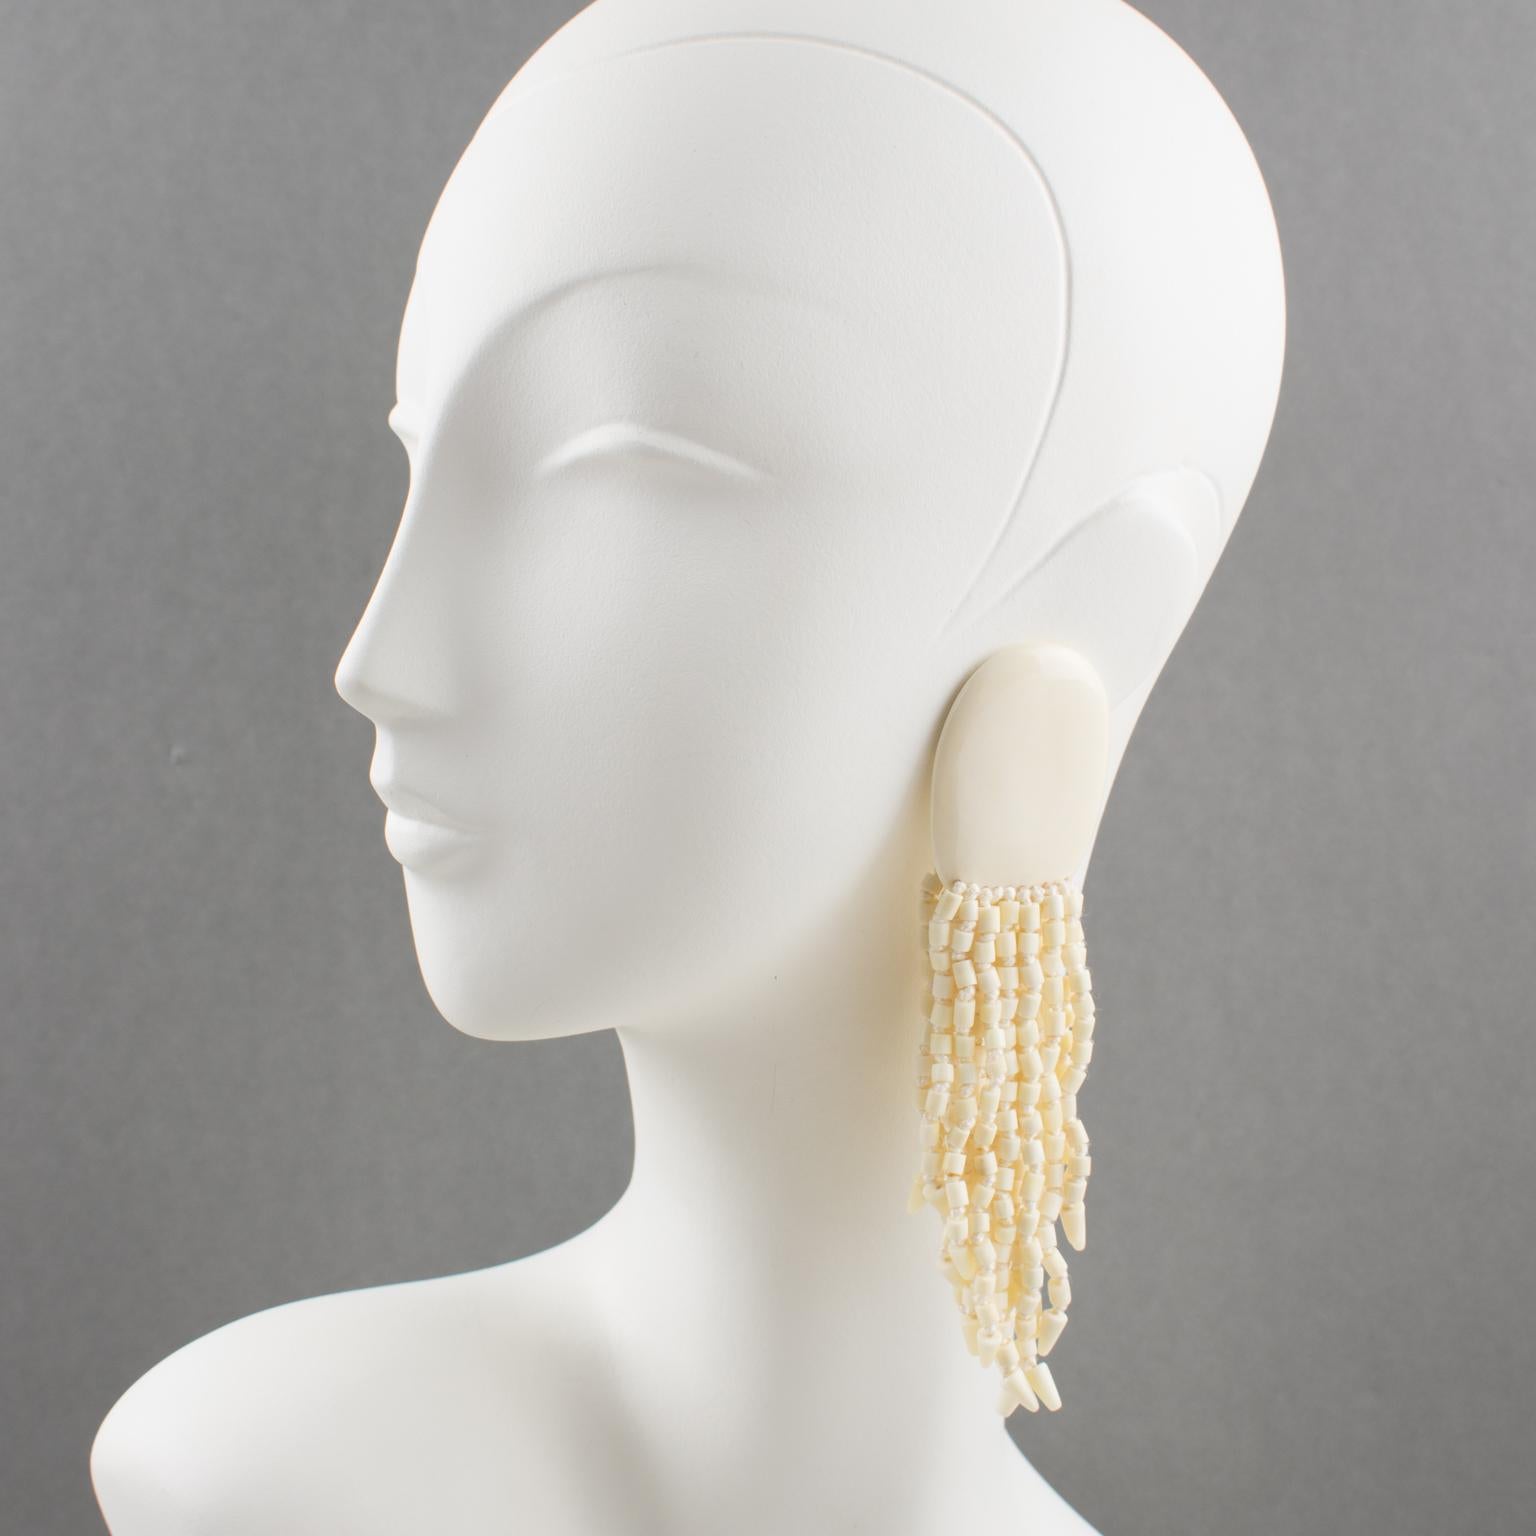 Stunning oversized clip-on earrings by Gerda Lyngaard for Monies. Dimensional large pebble ornate with multi-strand dangling charms in bovine bone elements. Lovely silky off-white color. Marked 'Monies' on each ear clip. 
Measurements: 5.50 in. long